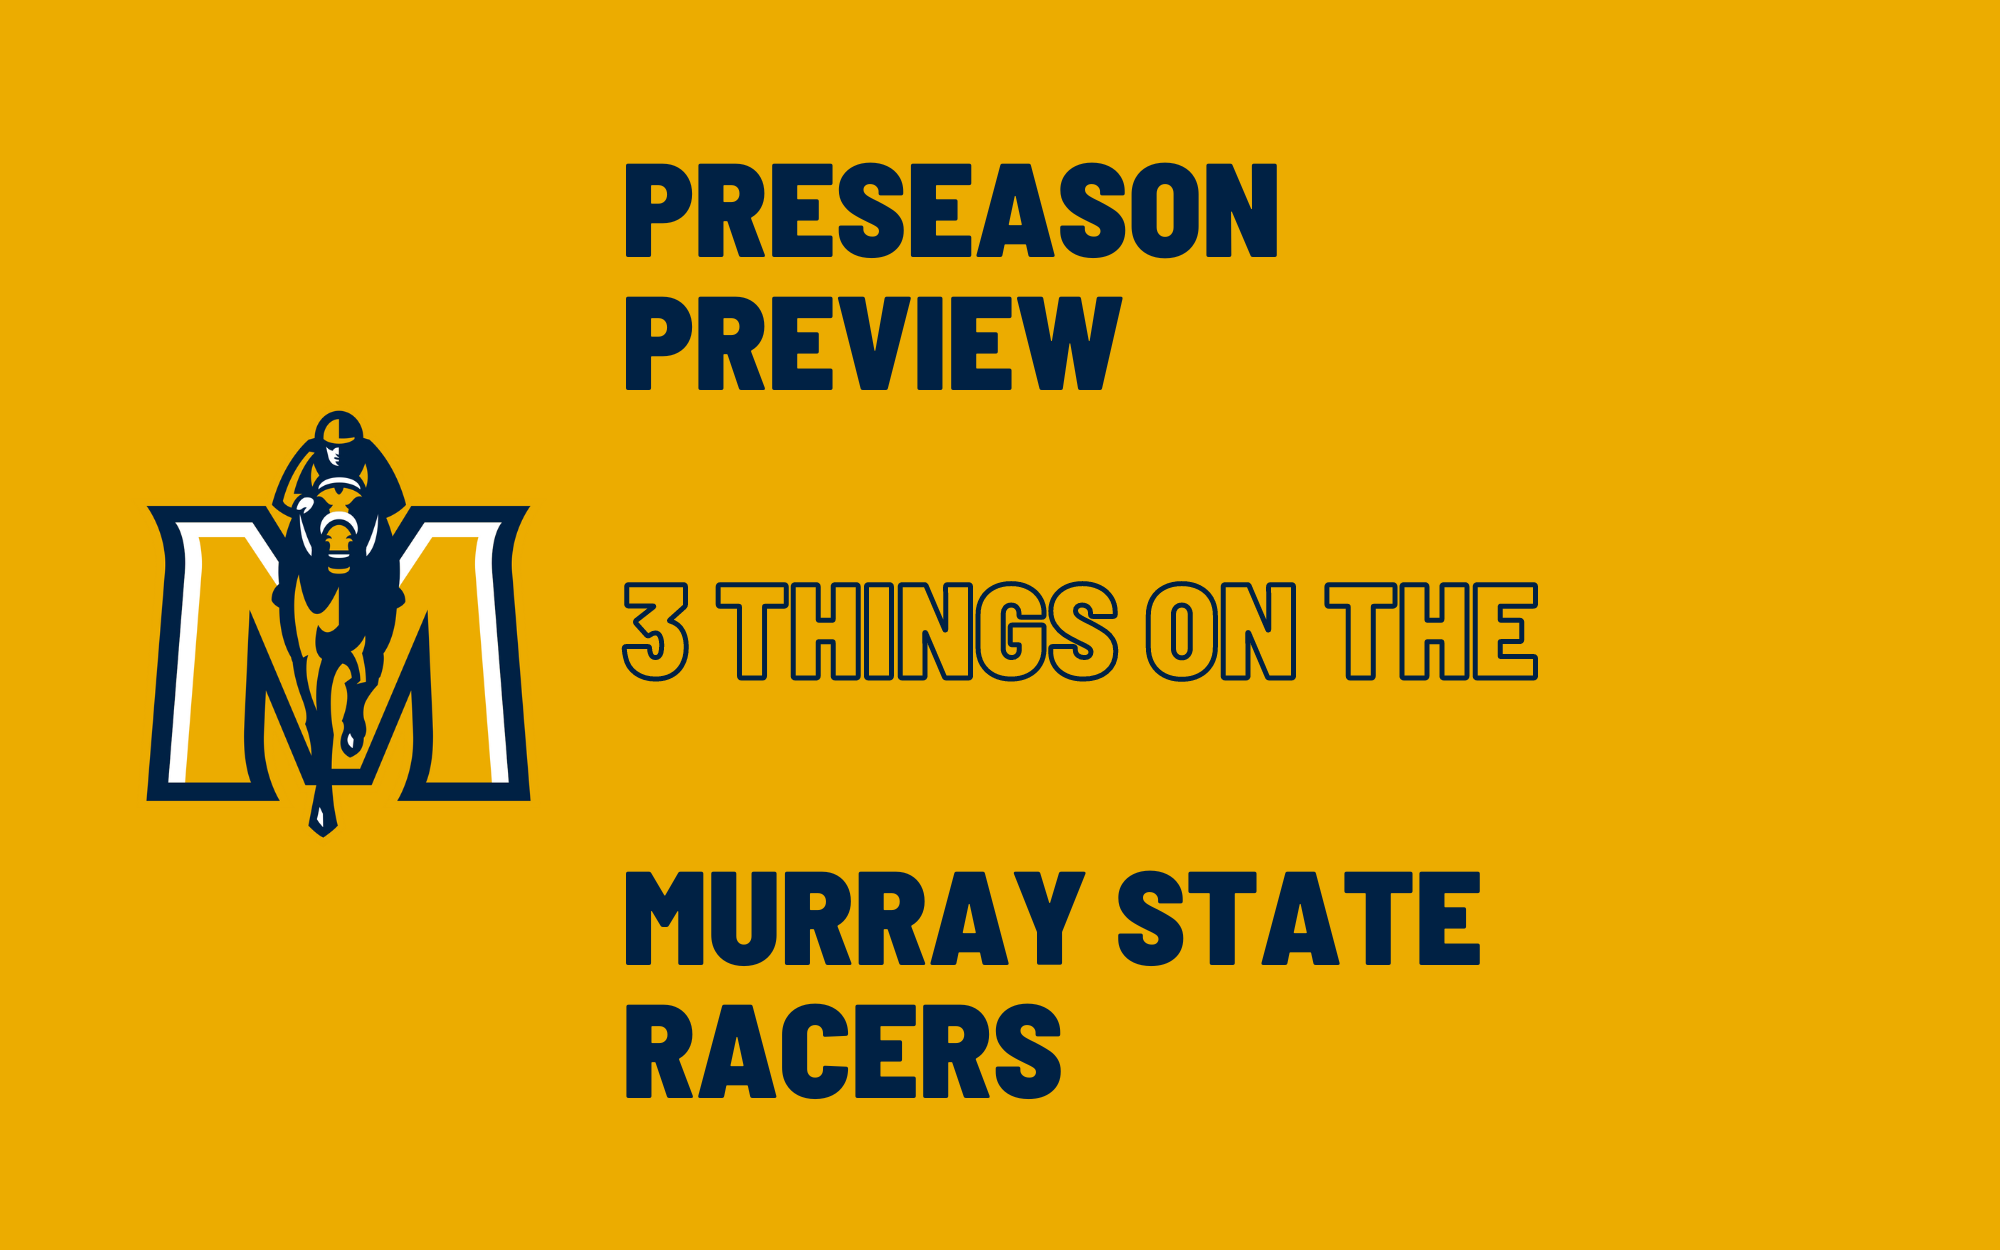 Preseason Preview | 3 Things on the Murray State Racers